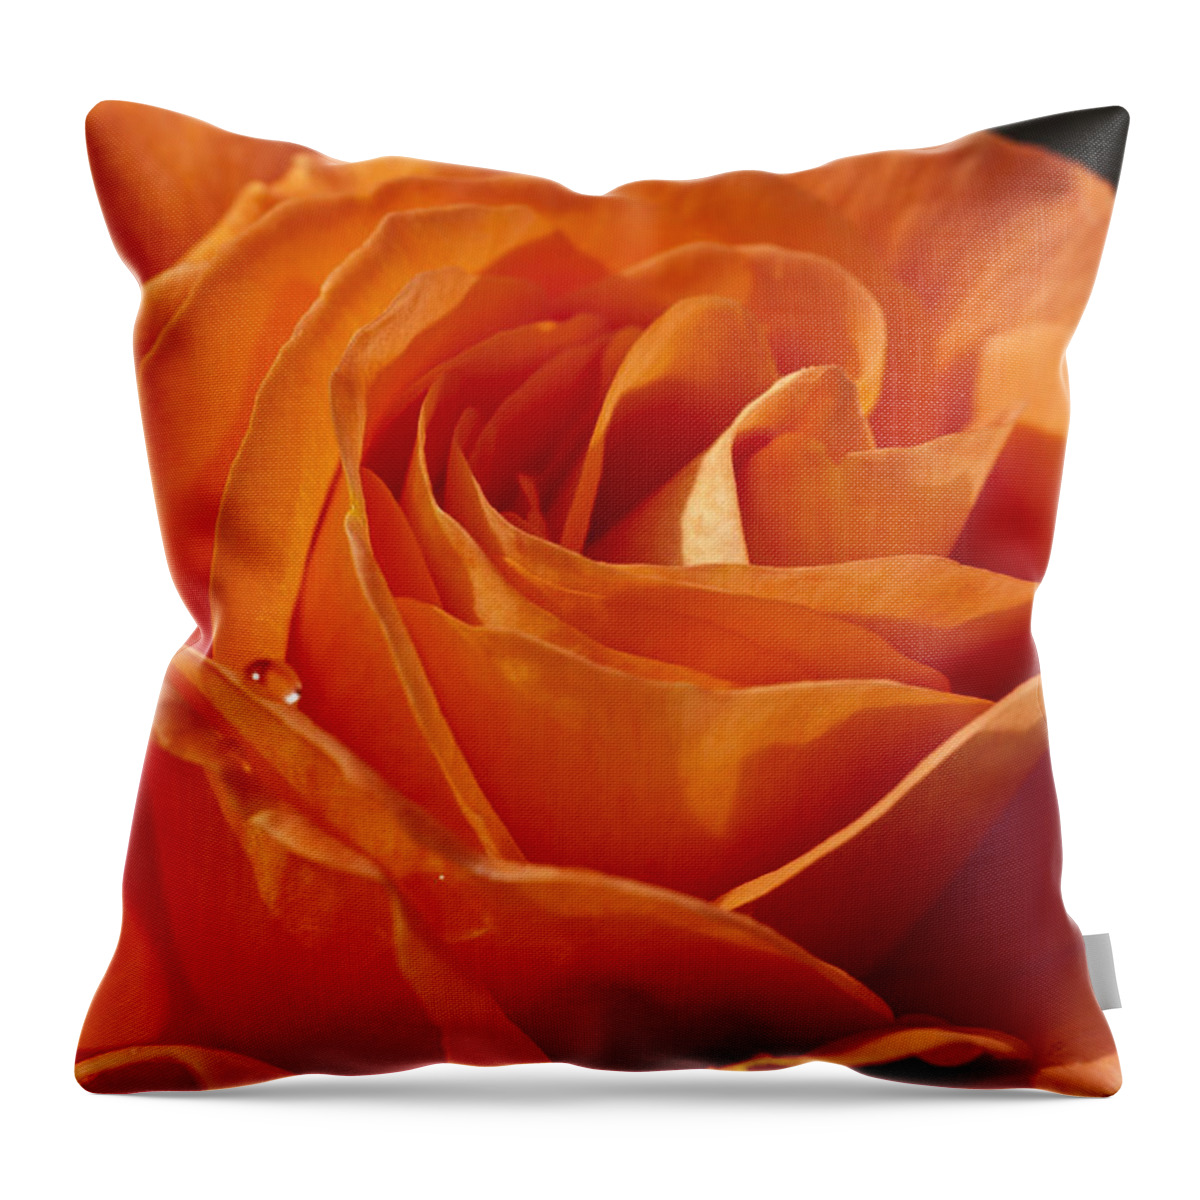 Orange Rose Throw Pillow featuring the photograph Orange Rose 2 by Steve Purnell